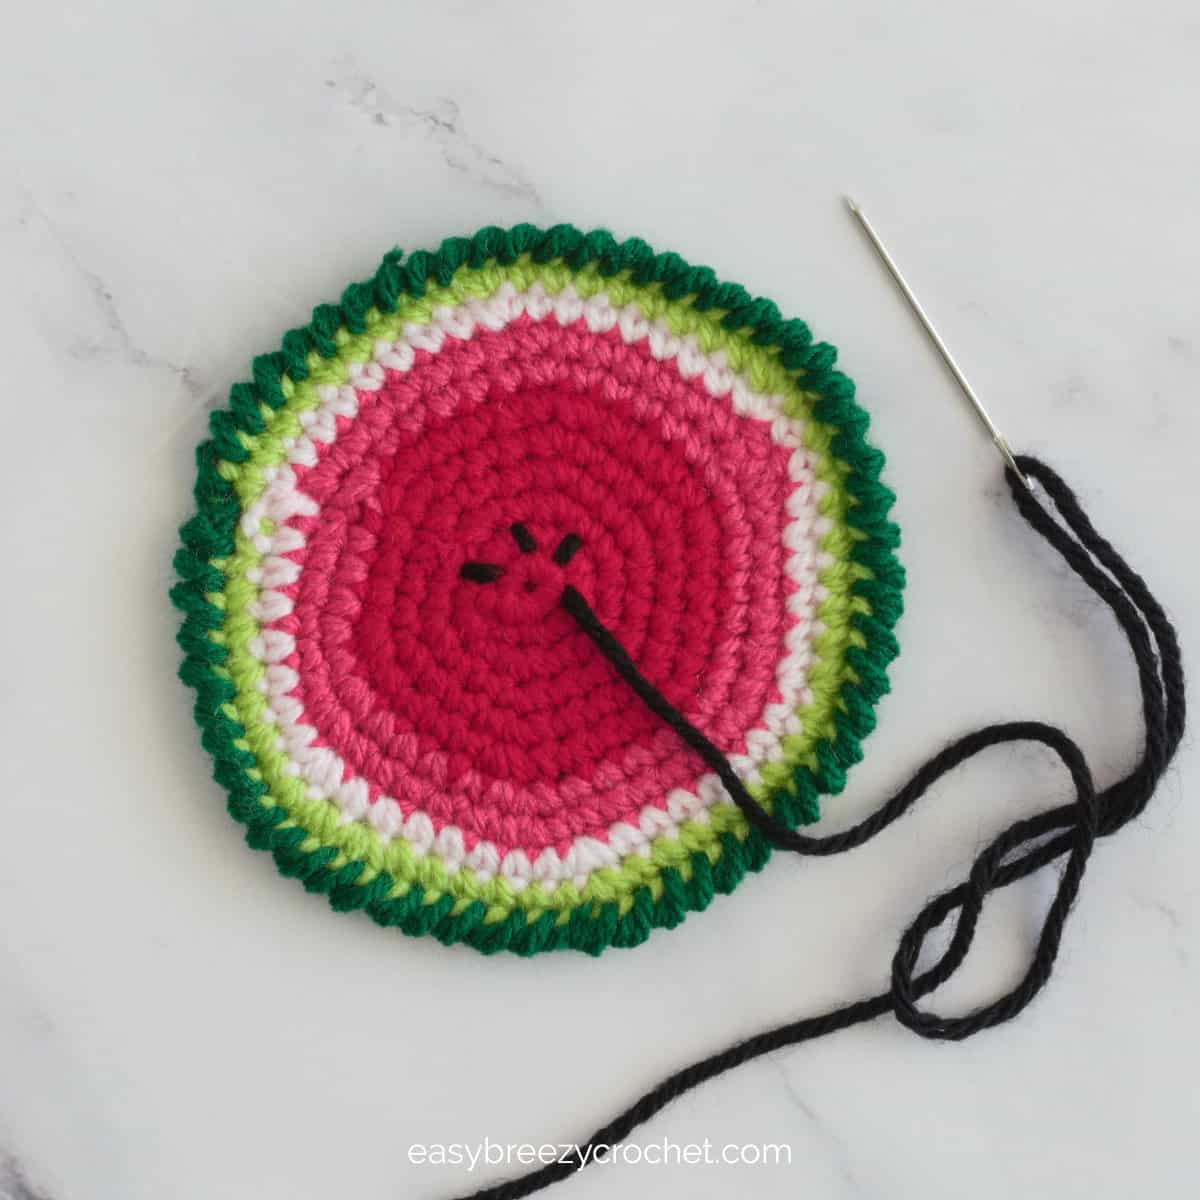 A partially completed crochet watermelon coaster.